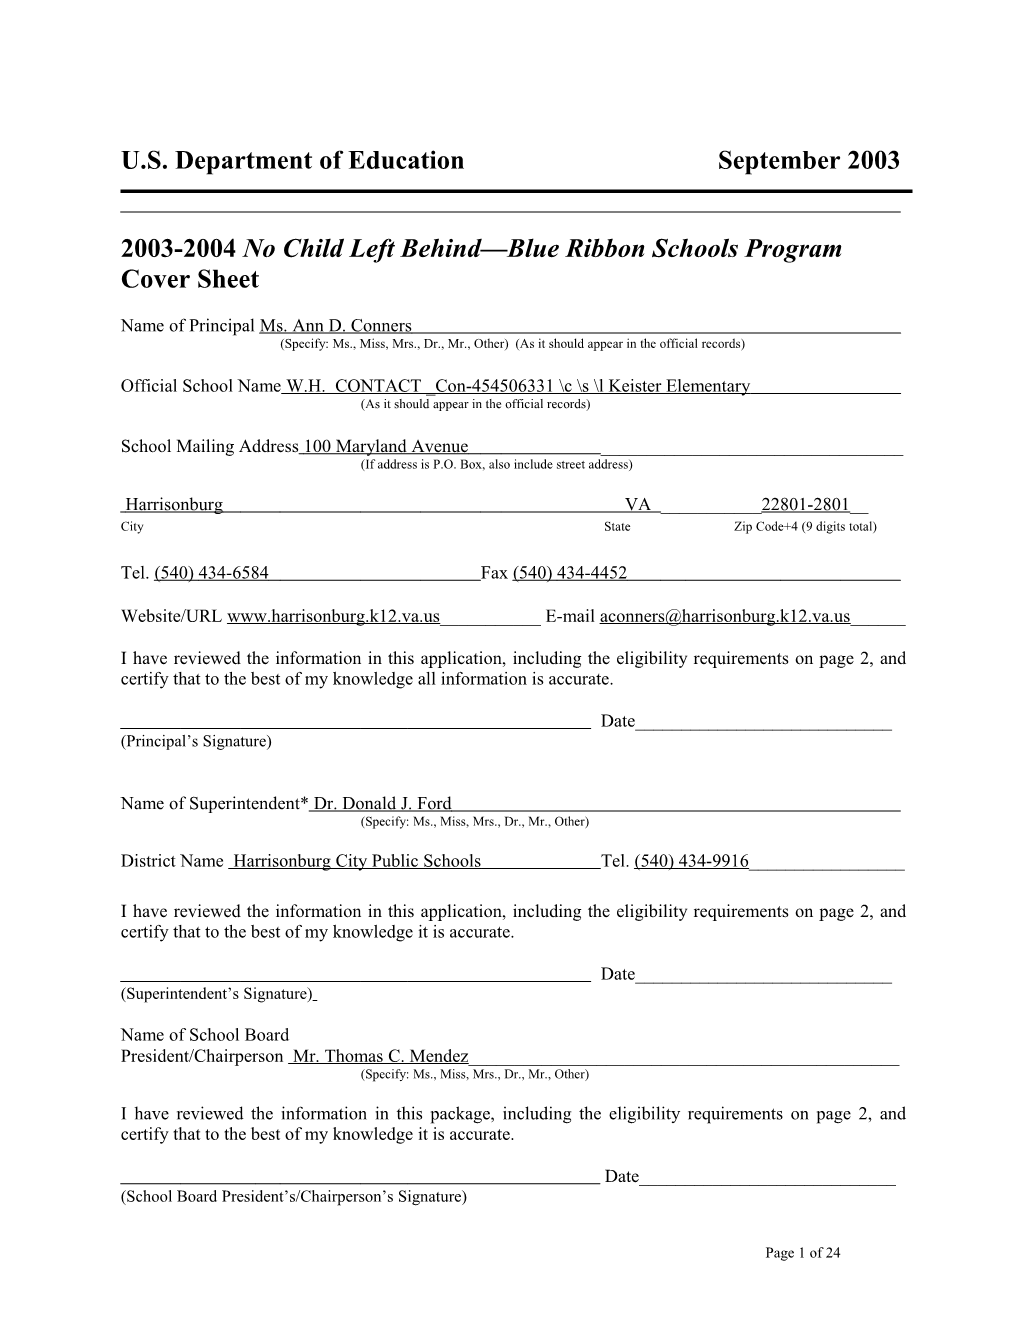 W.H. Keister Elementary School 2004 No Child Left Behind-Blue Ribbon School Application (Msword)